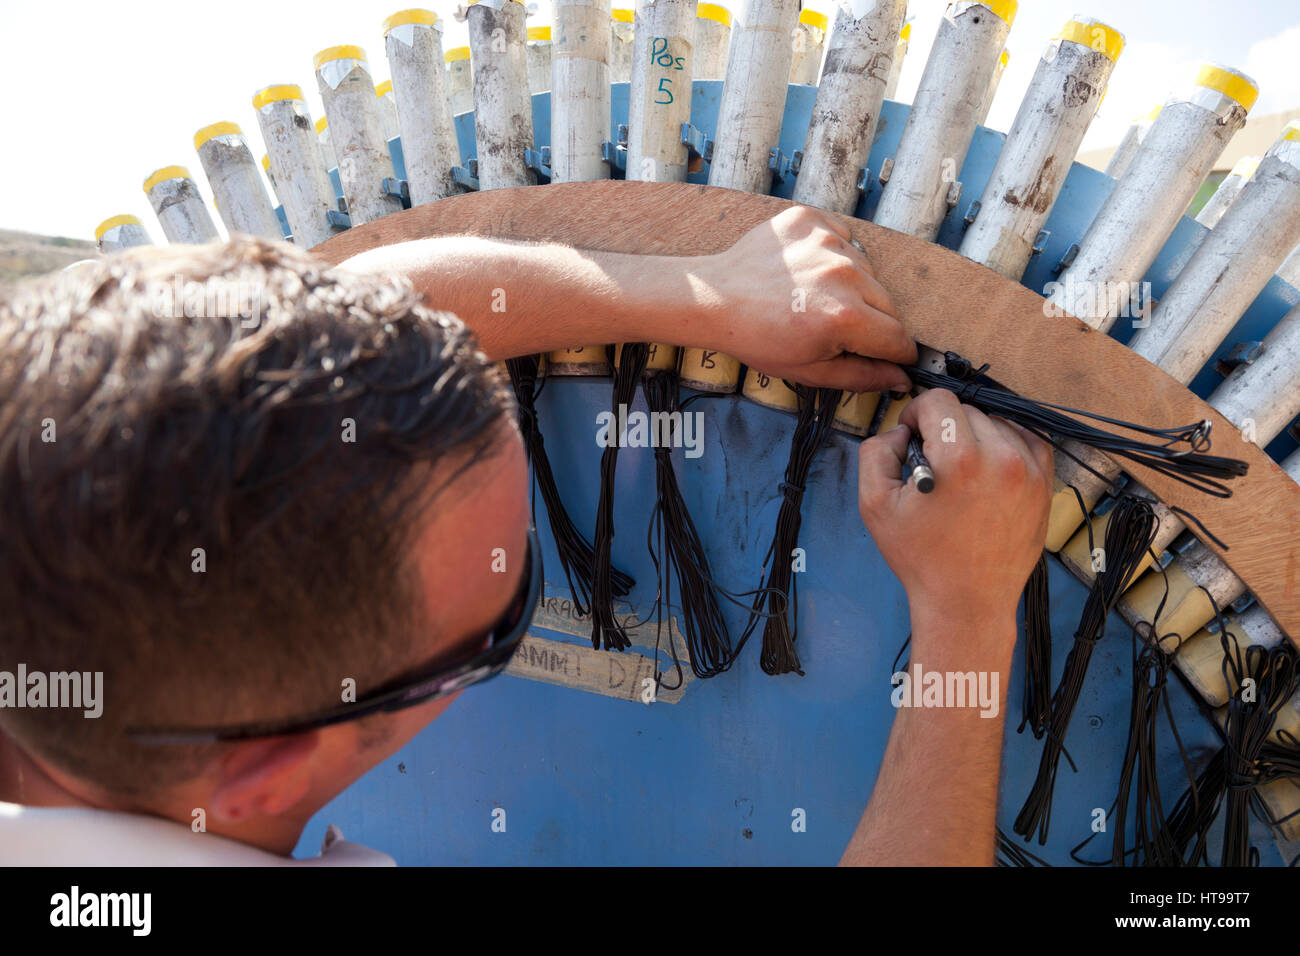 A Maltese pyrtechnician numbers tubes filled with fireworks during the setting up of a professional pyrotechnic show put up for a Catholic feast. Stock Photo